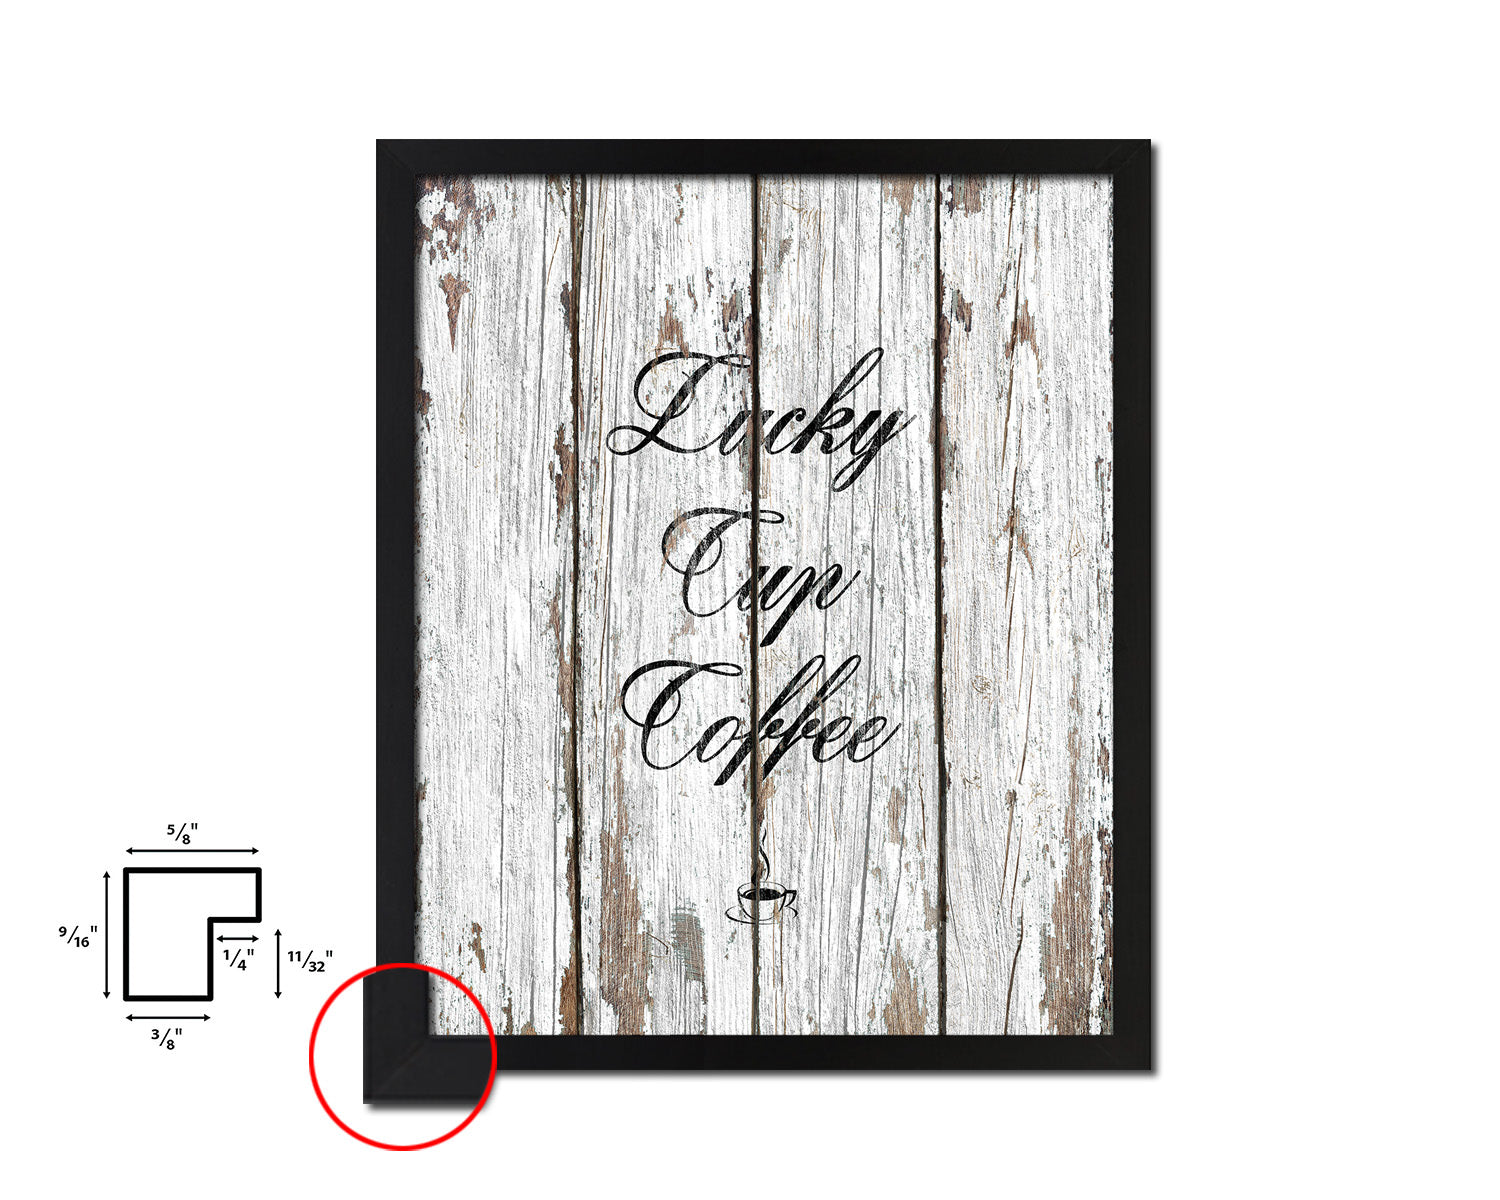 Lucky cup coffee Quote Framed Artwork Print Wall Decor Art Gifts